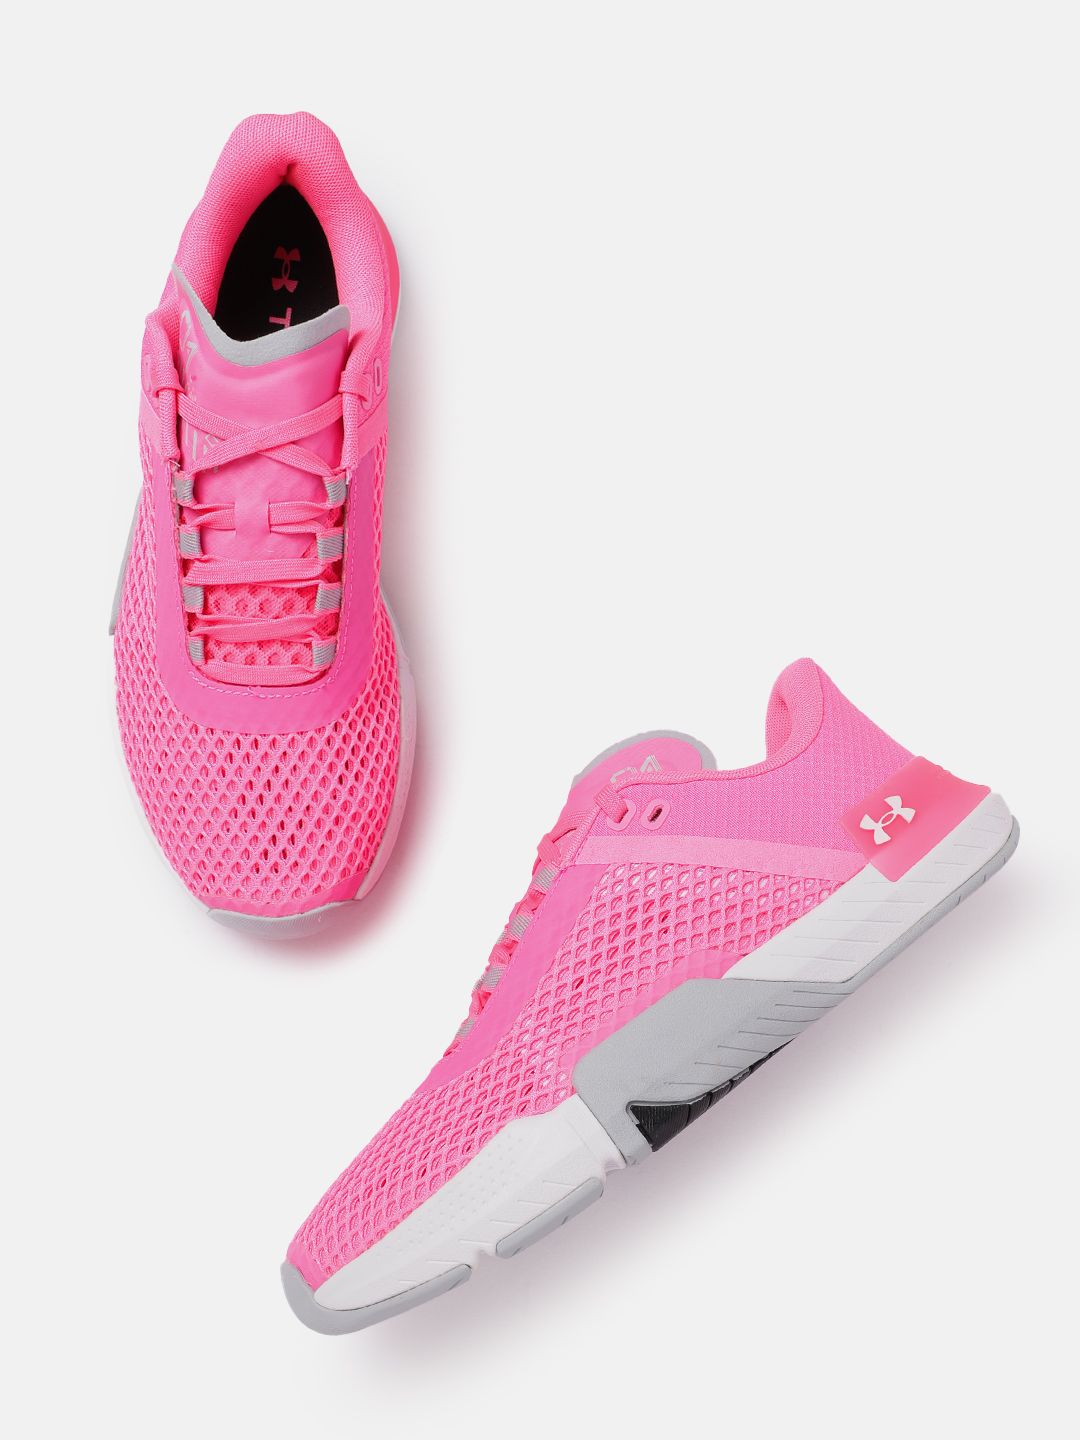 UNDER ARMOUR Women Woven Design TriBase Reign 4 Running Shoes Price in India